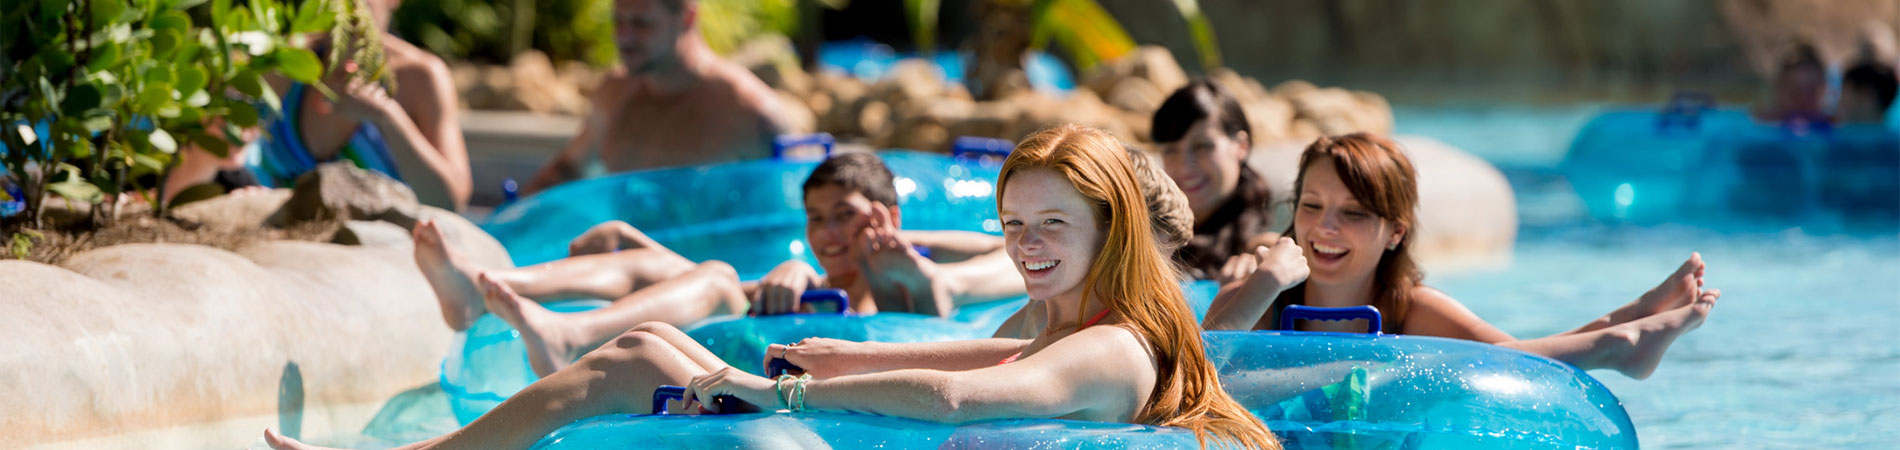 Take a moment to chill in the lazy river at Aquatica.